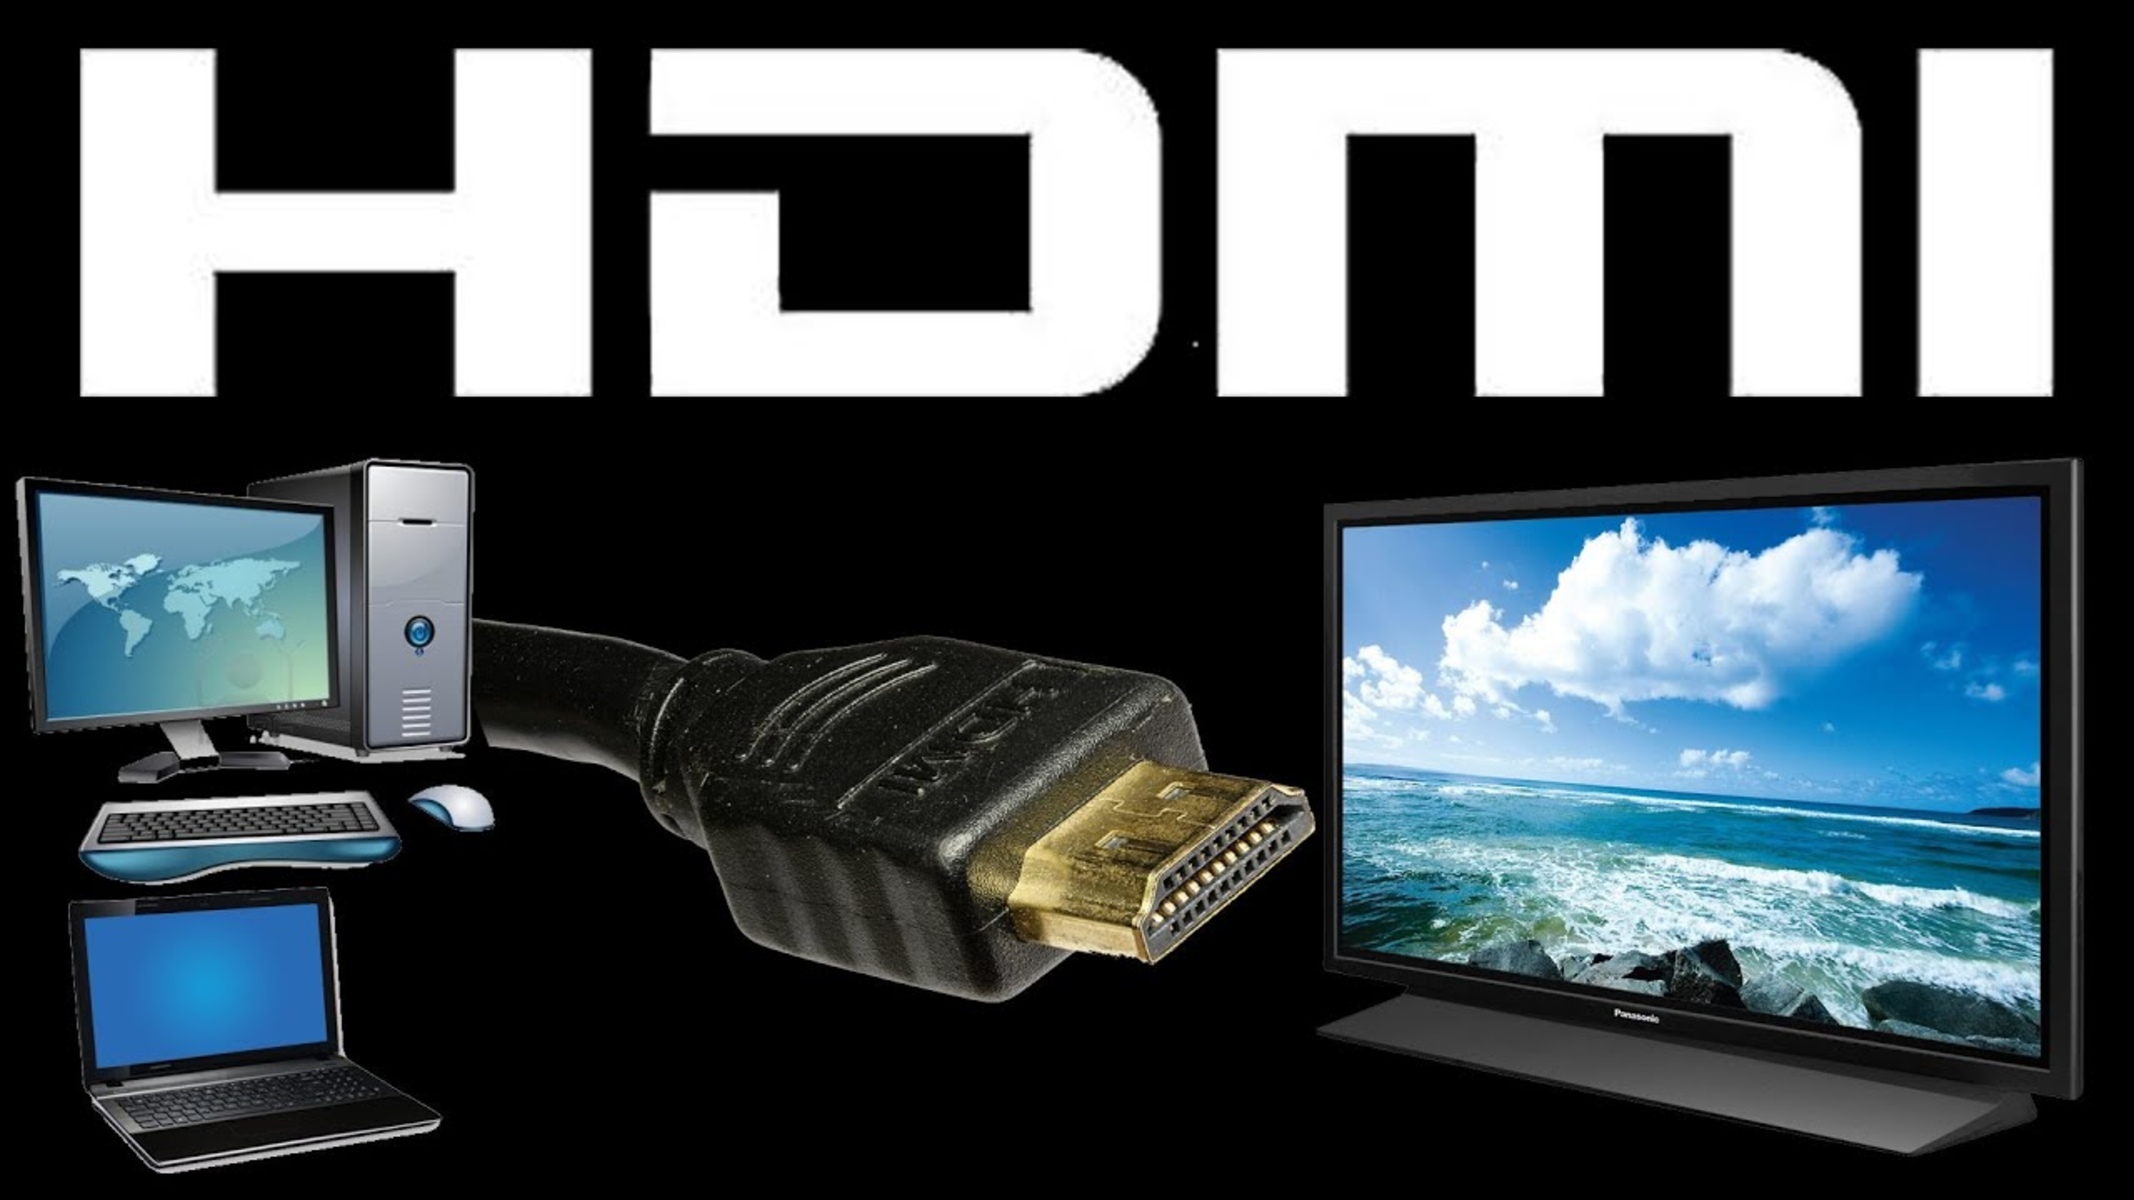 Ensure the HDMI cable is properly connected to both the PS4 and the TV or monitor.
Try using a different HDMI cable or port on the TV/monitor to determine if the issue is with the cable or the port.